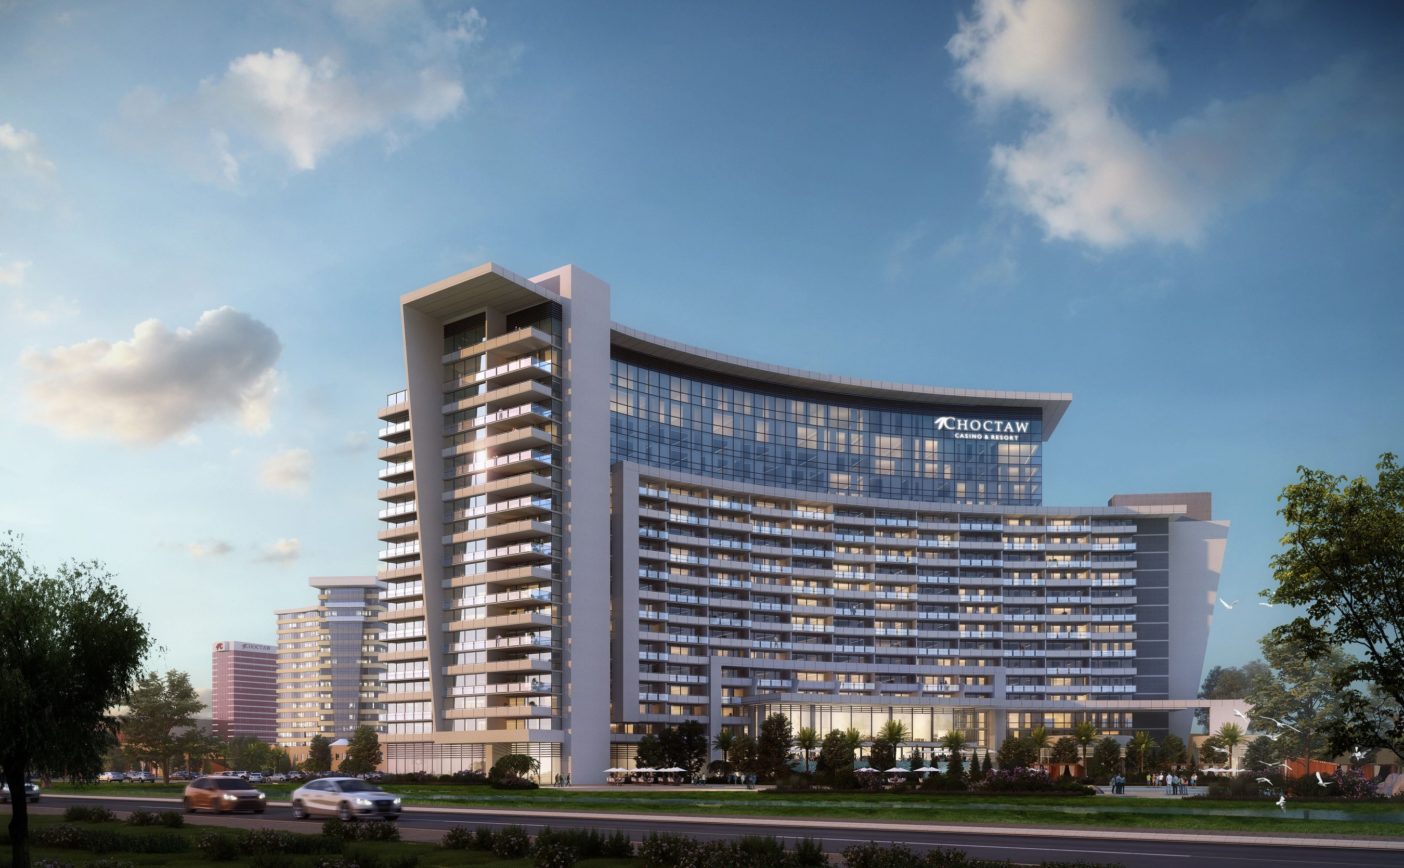 Choctaw Nation of Oklahoma has plans to expand its resort property in Durant, OK.